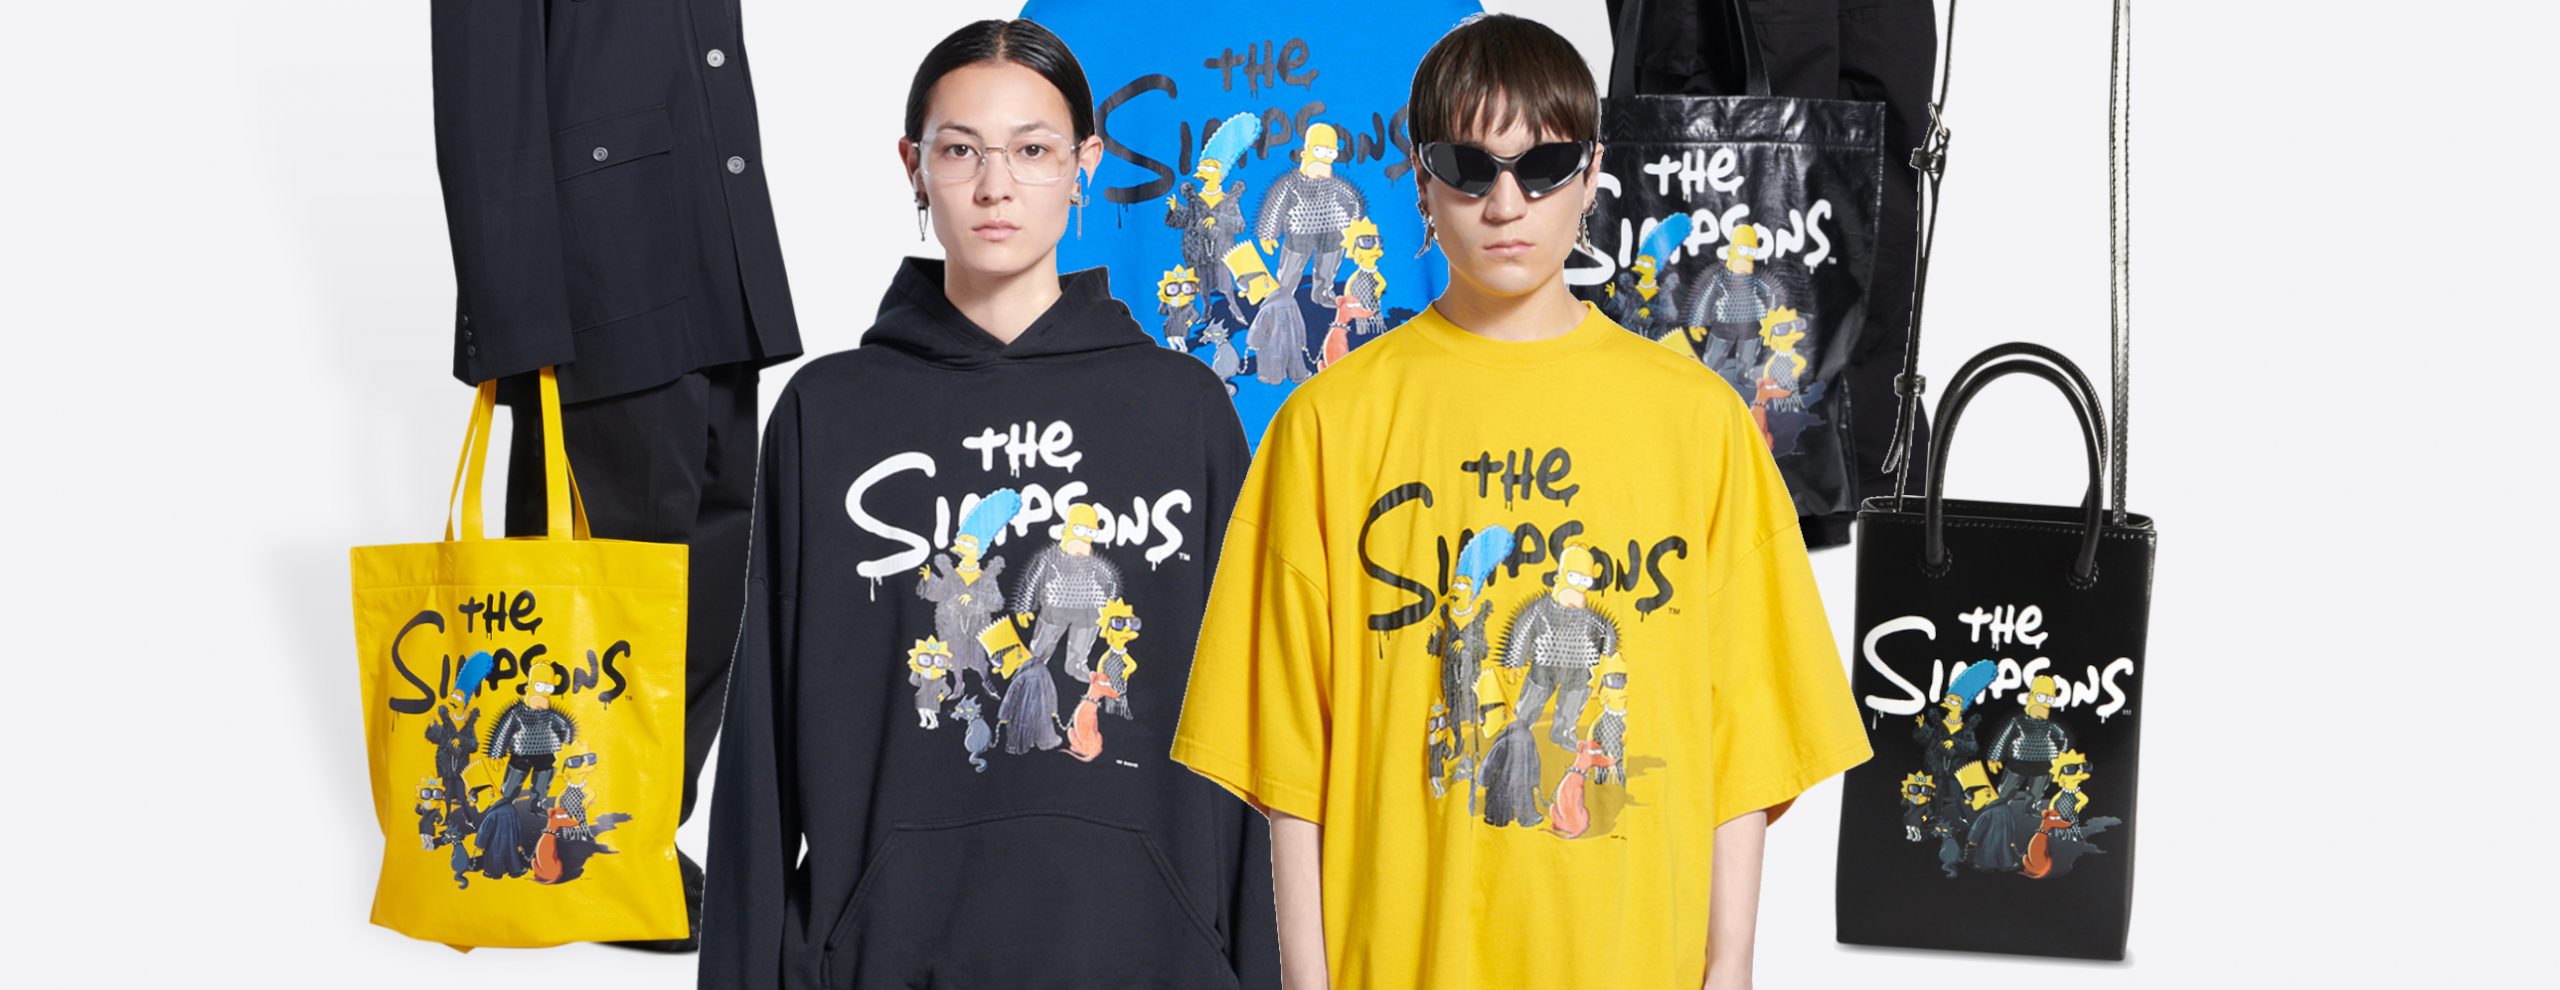 The Simpsons x Balenciaga Capsule Collection Of Hoodies, T-Shirts